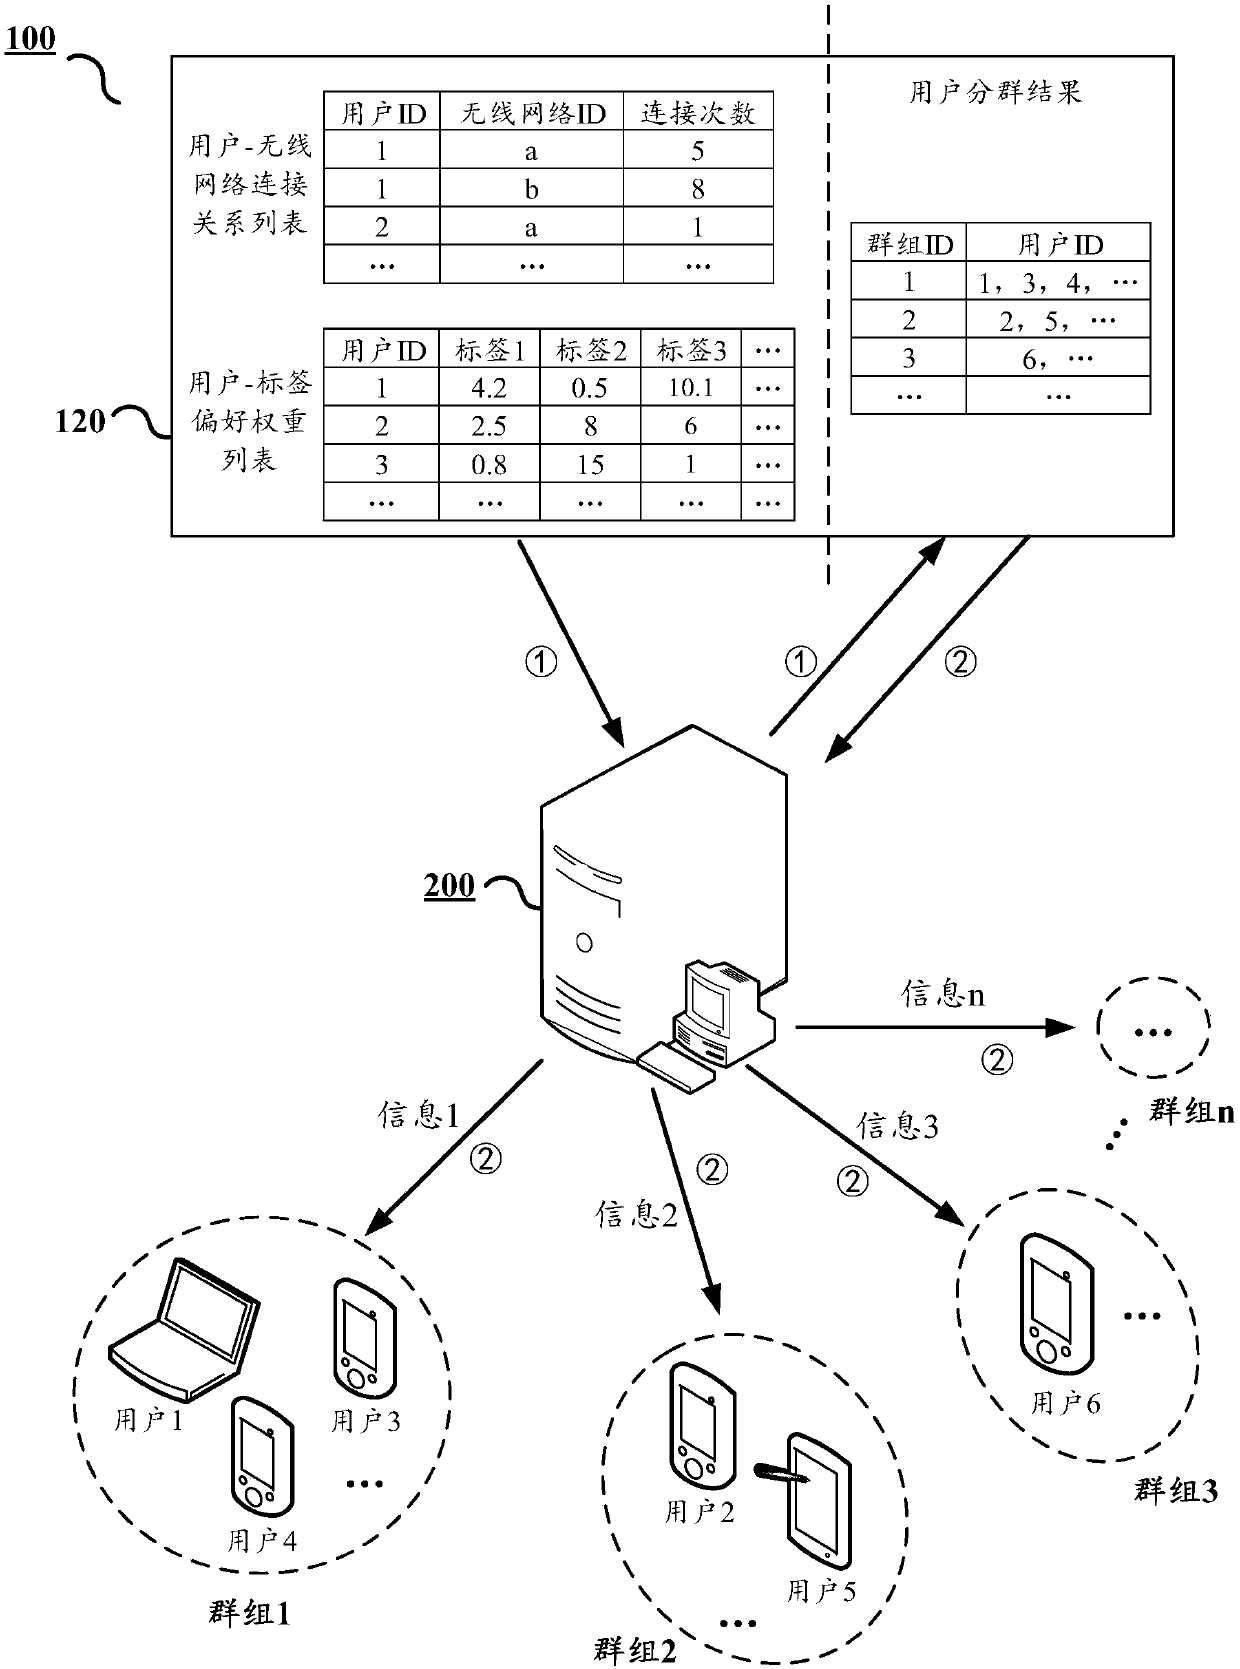 User grouping method and calculating device